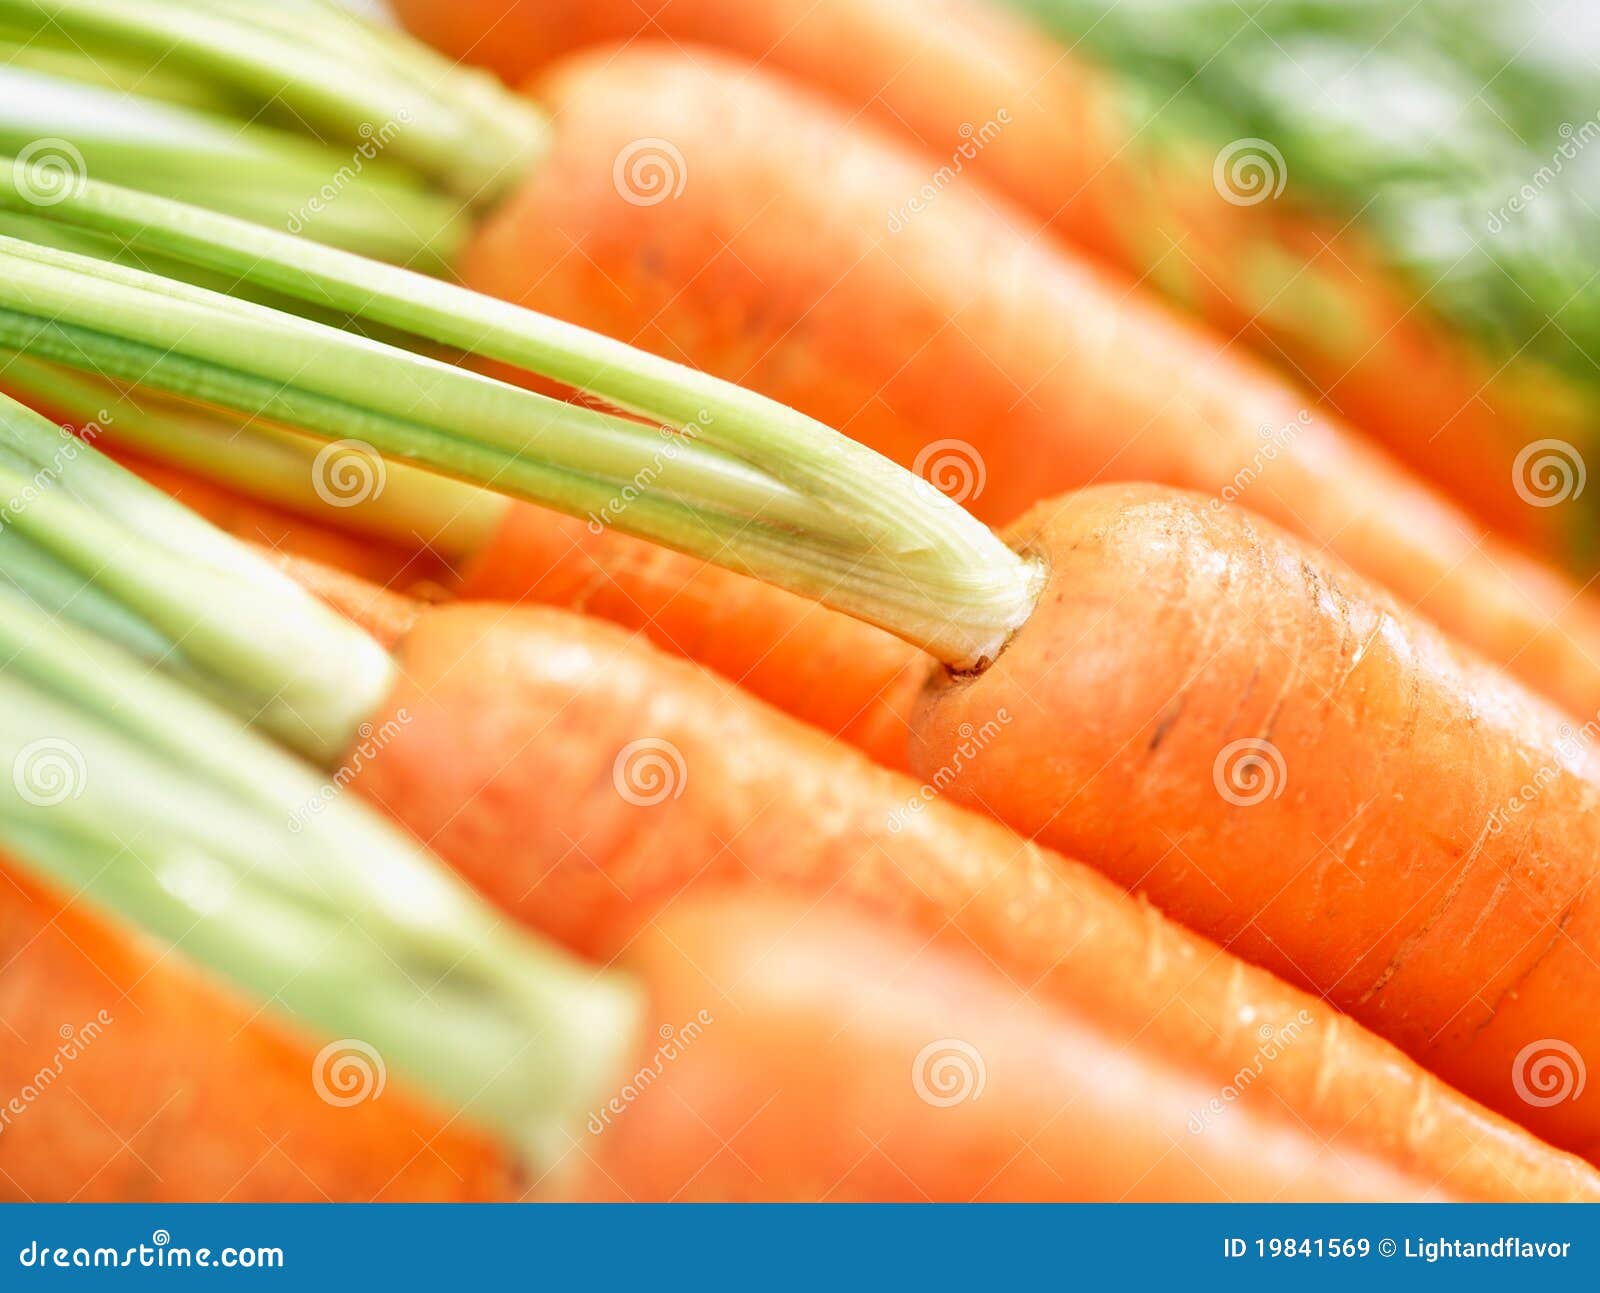 bunch of crunchy carrots close-up